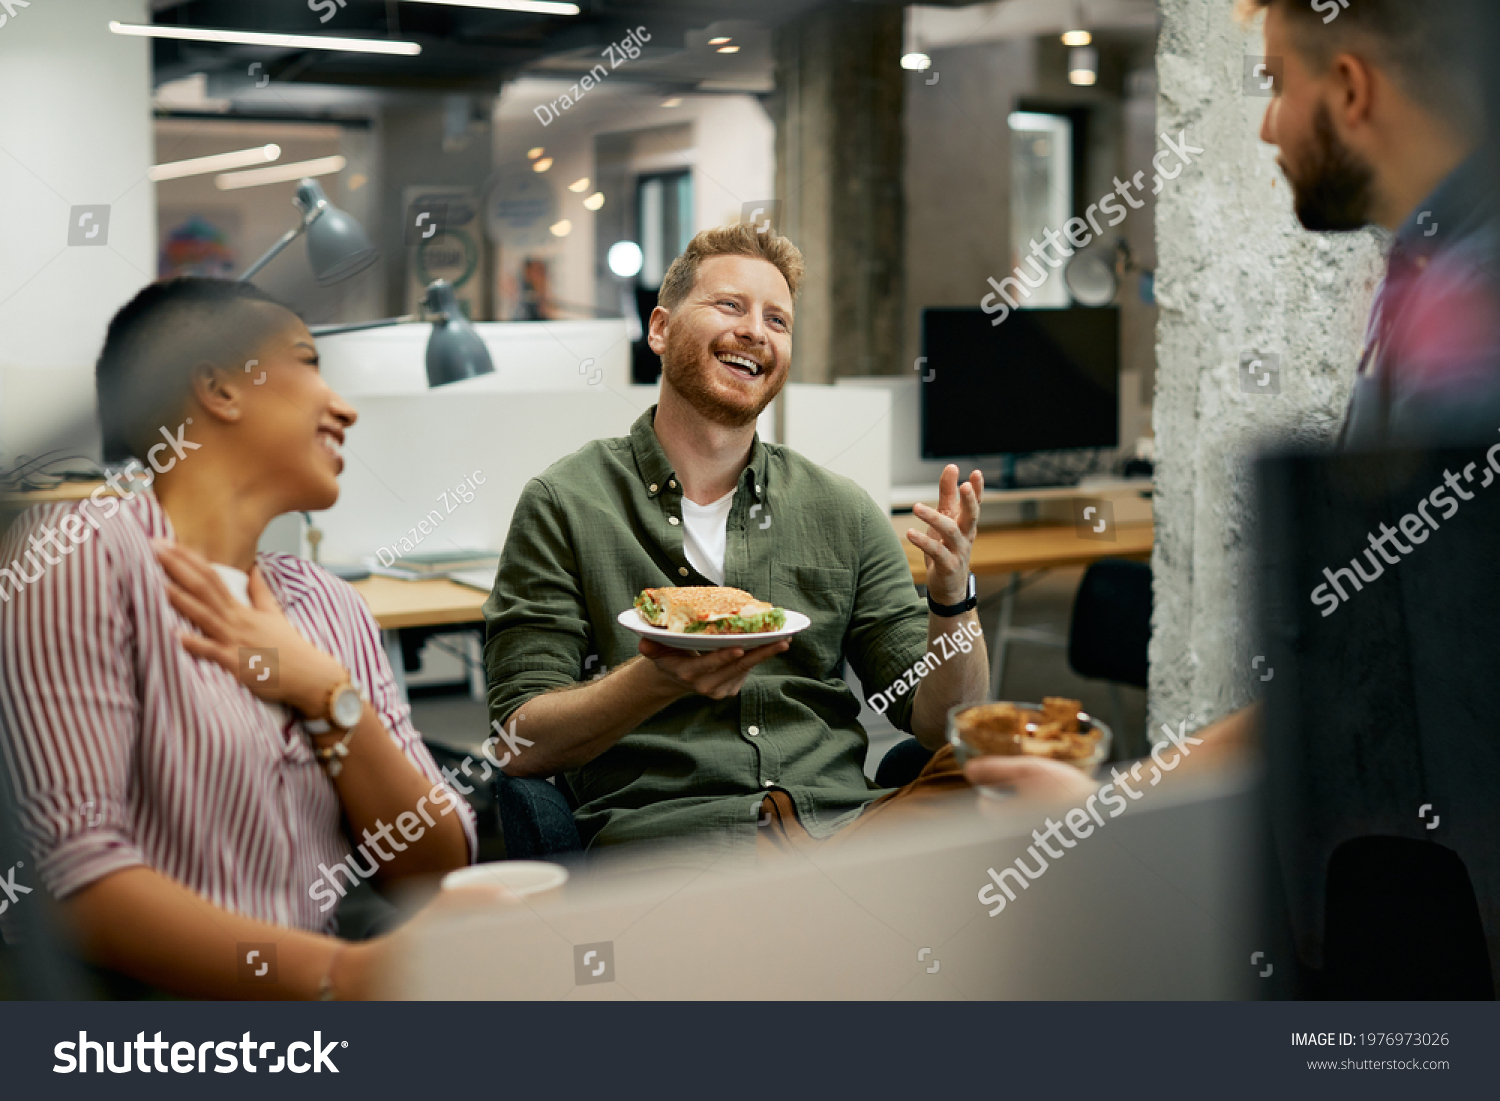 Team of happy freelancers having fun while communicating on lunch break in the office. Focus is on redhead man.  #1976973026